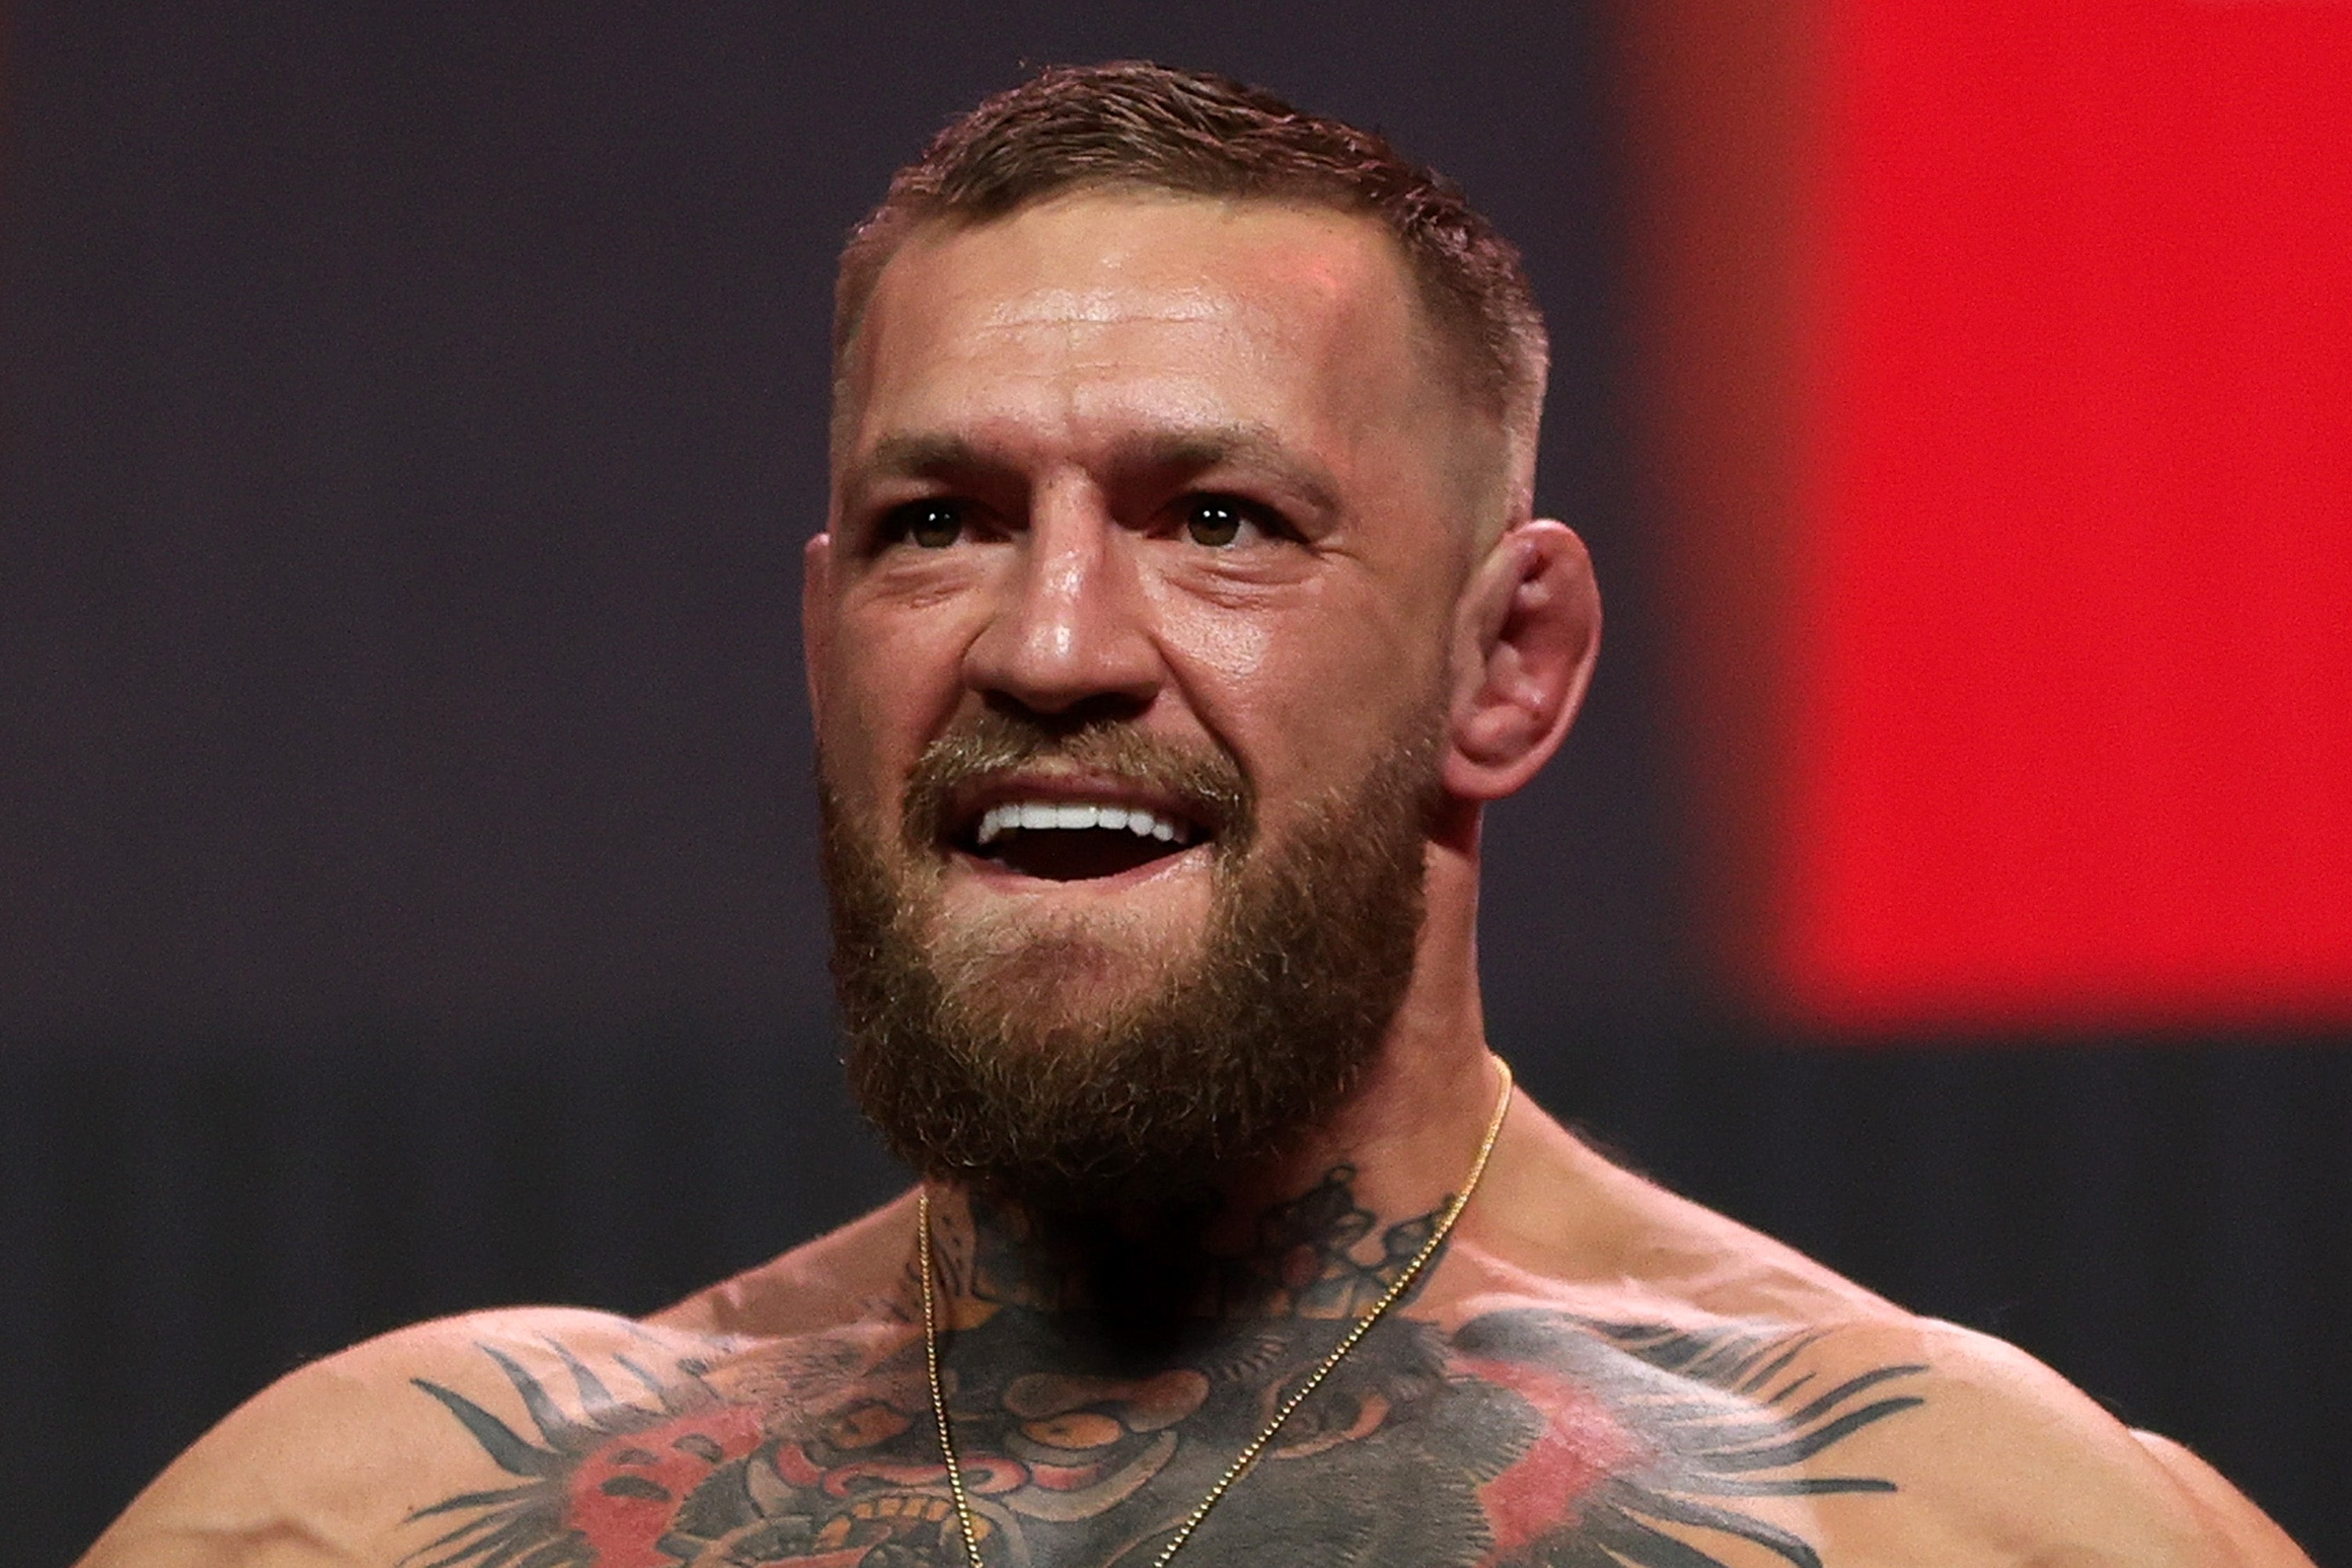 Conor McGregor ‘impossible to respect as a person’, claims UFC star